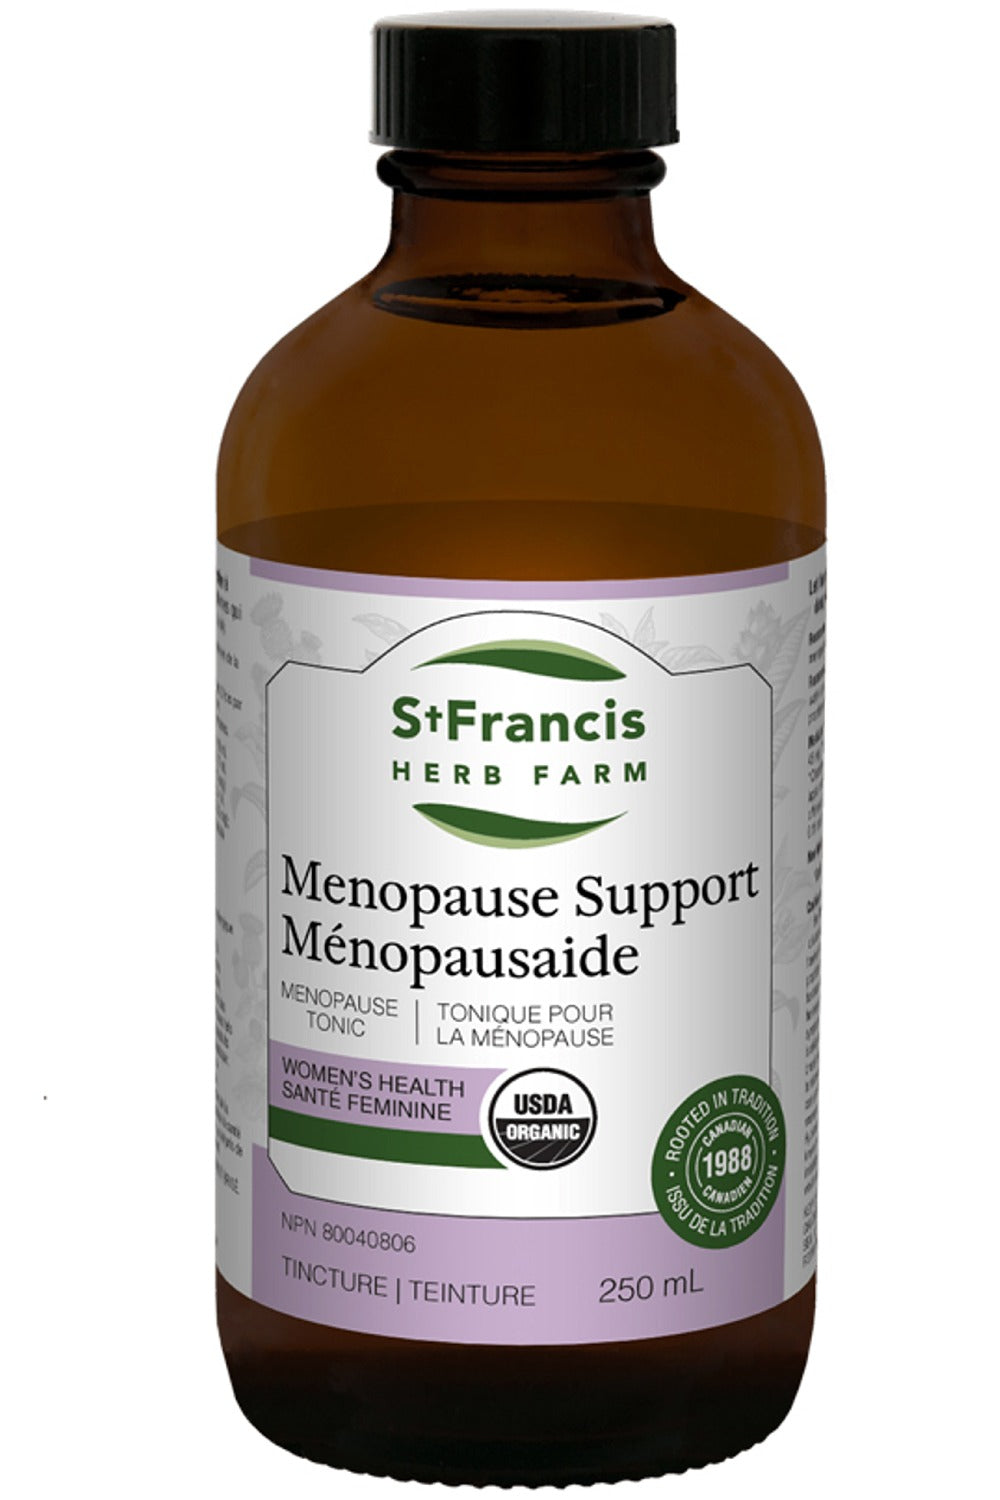 ST FRANCIS HERB FARM Menopause Support (250 ml)